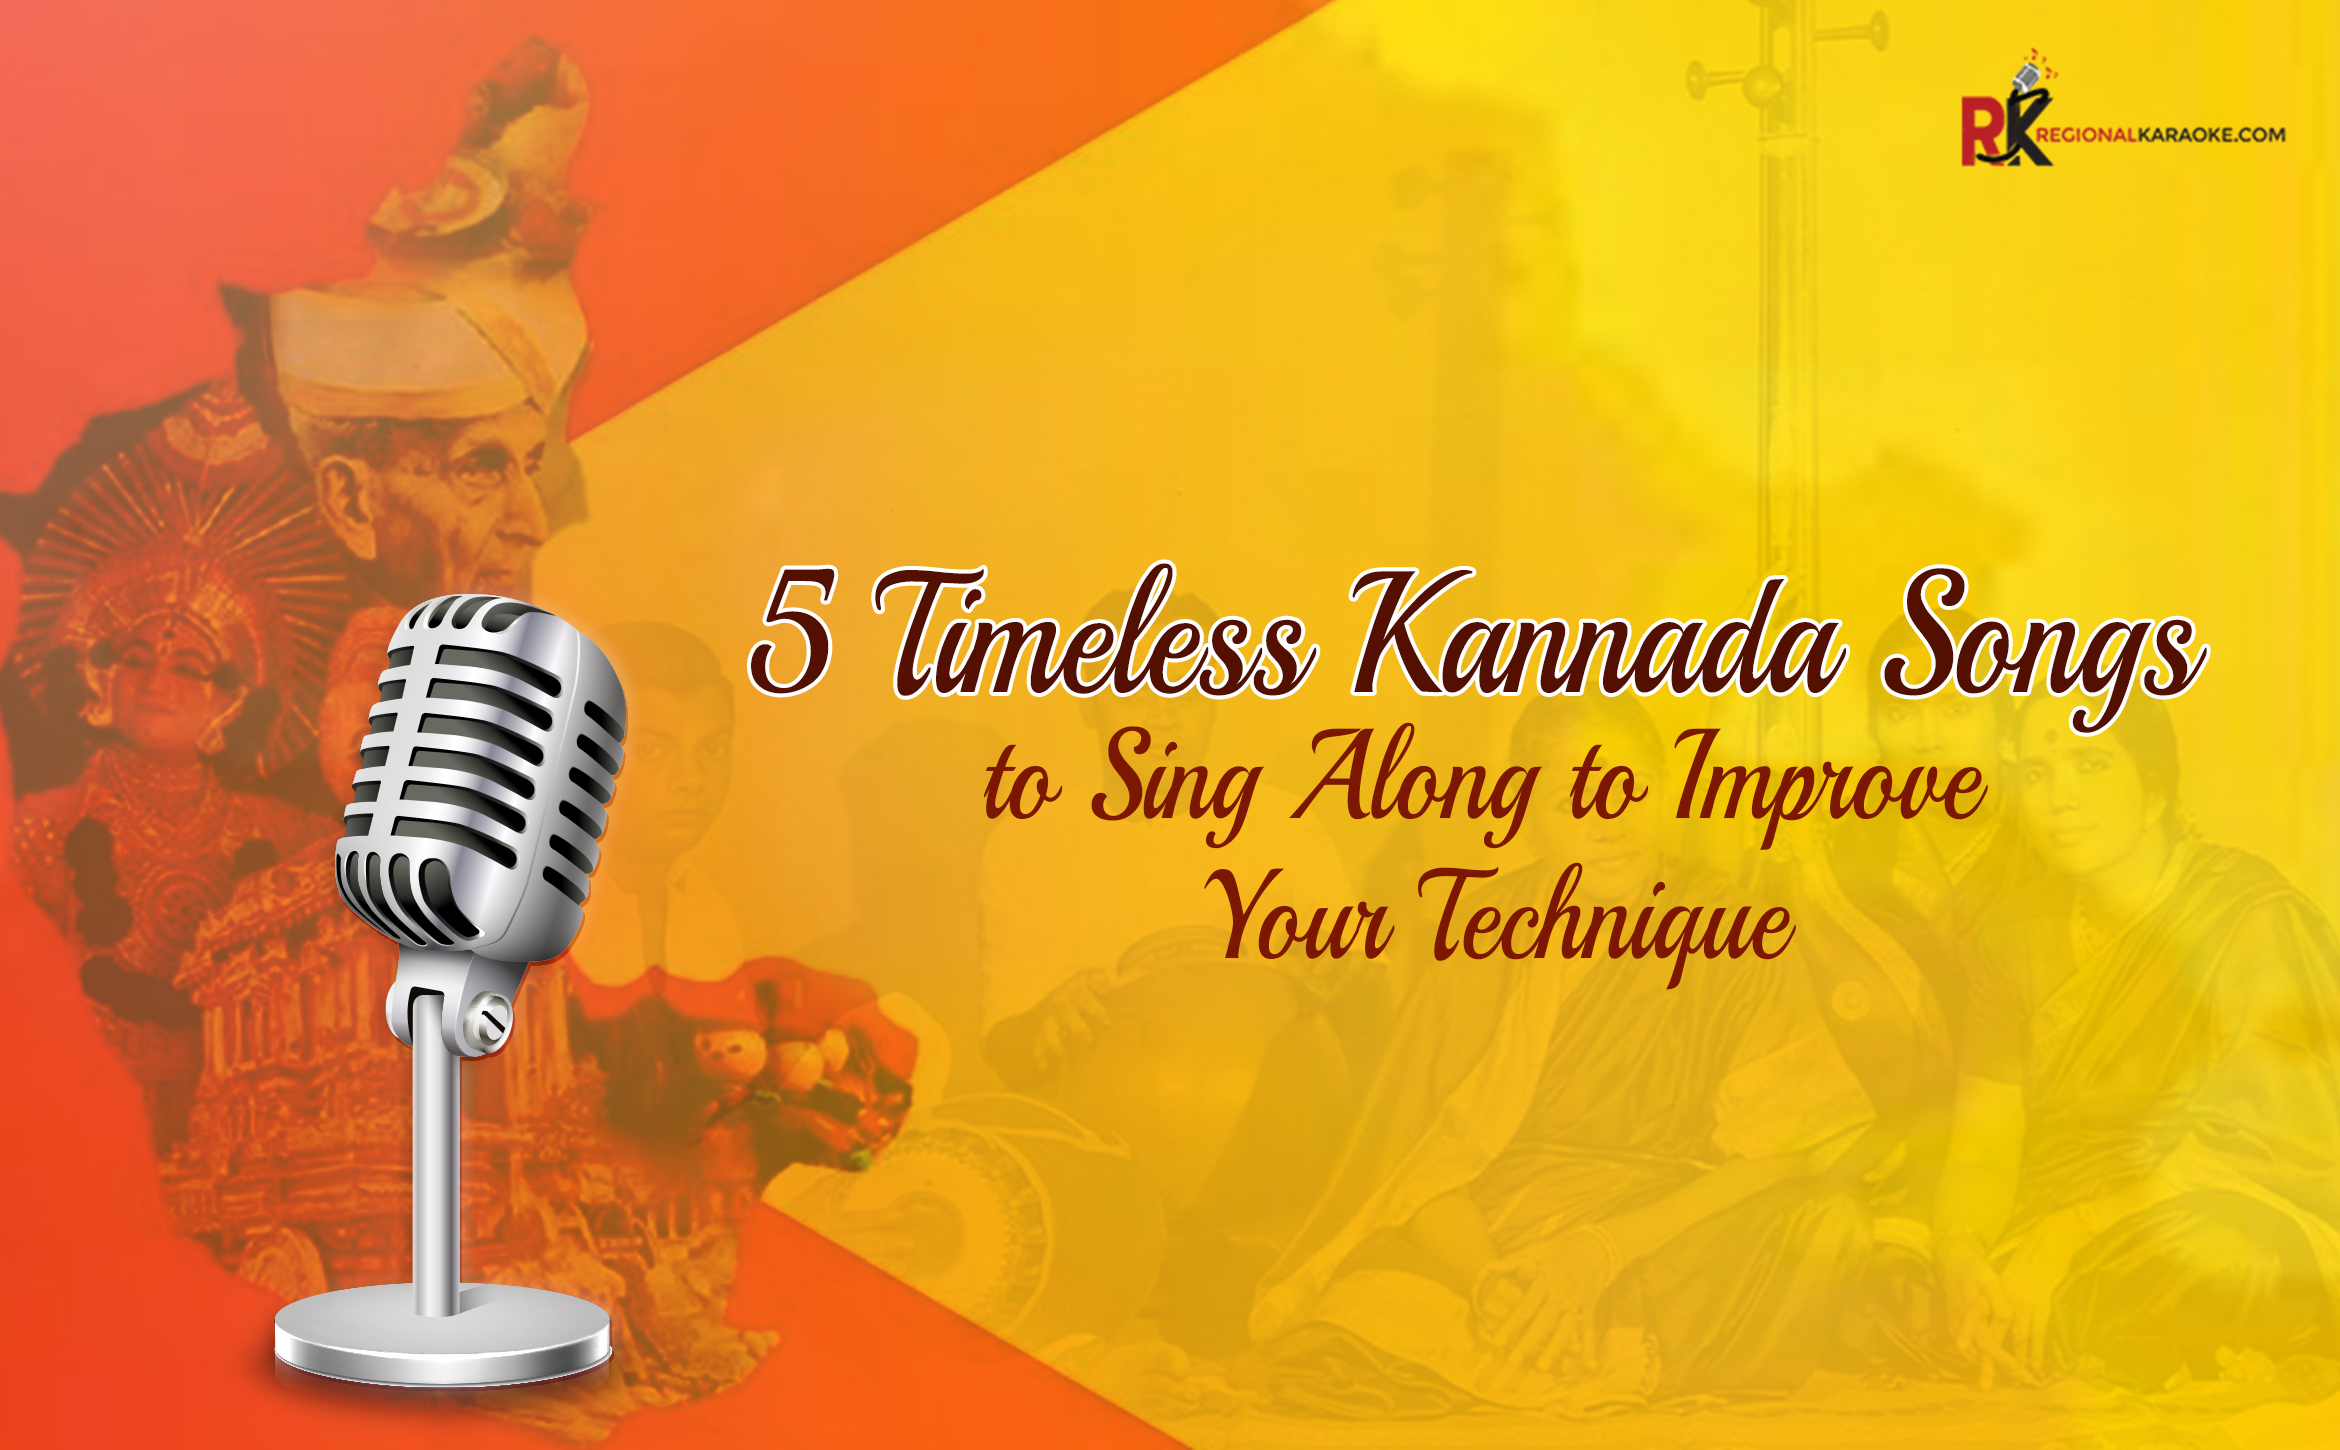 5 Timeless Kannada Songs to Sing Along to Improve Your Technique